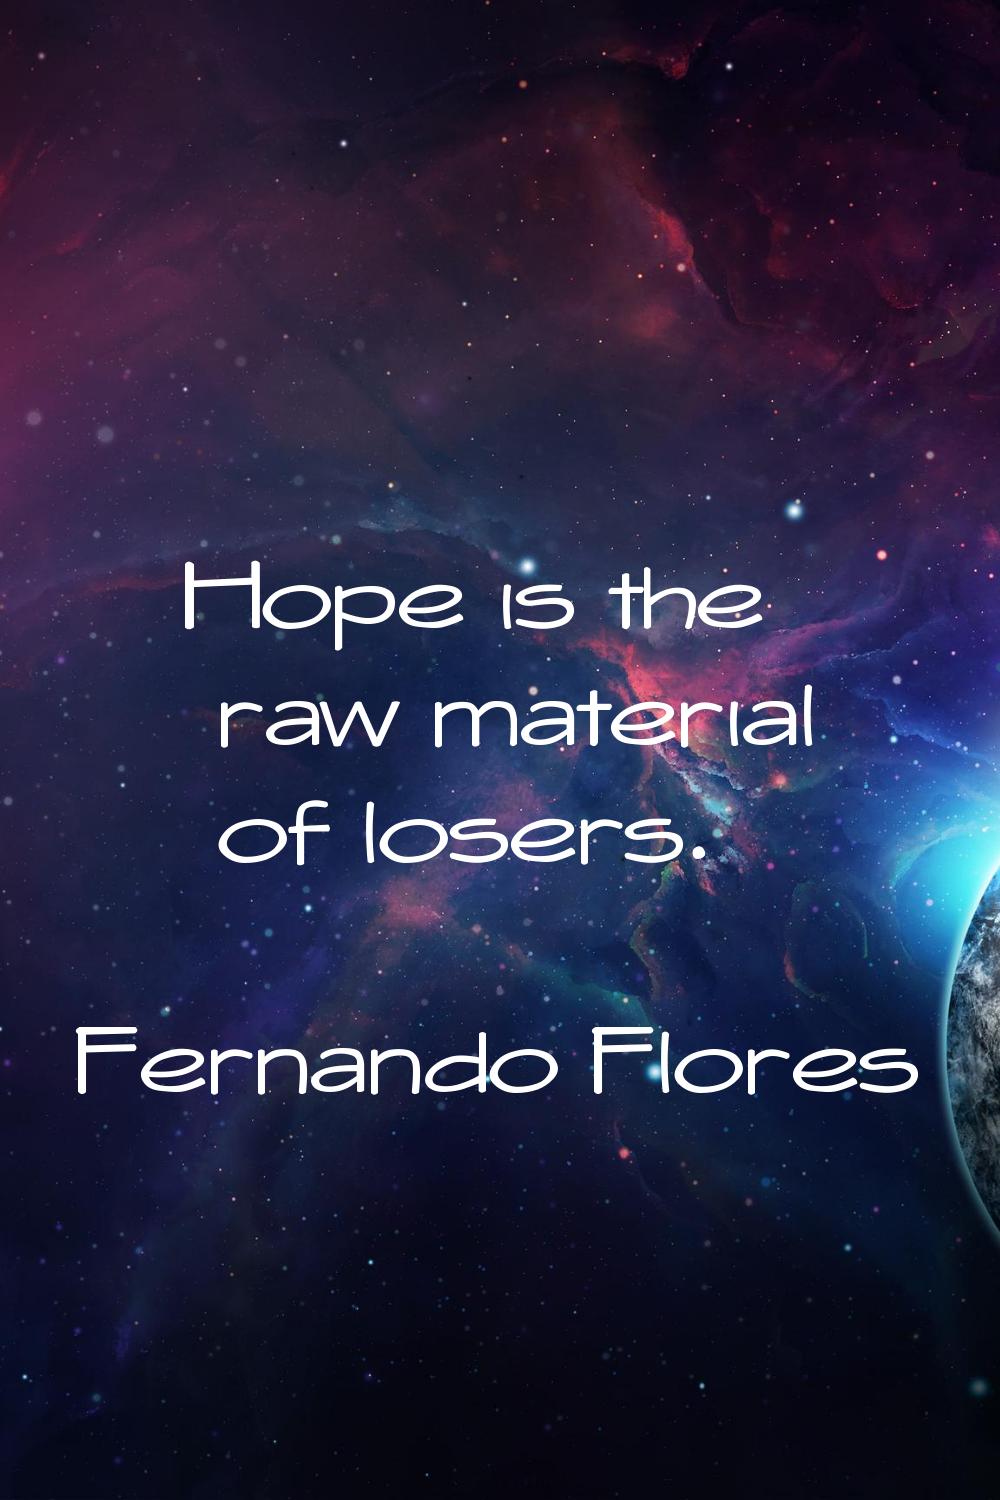 Hope is the raw material of losers.